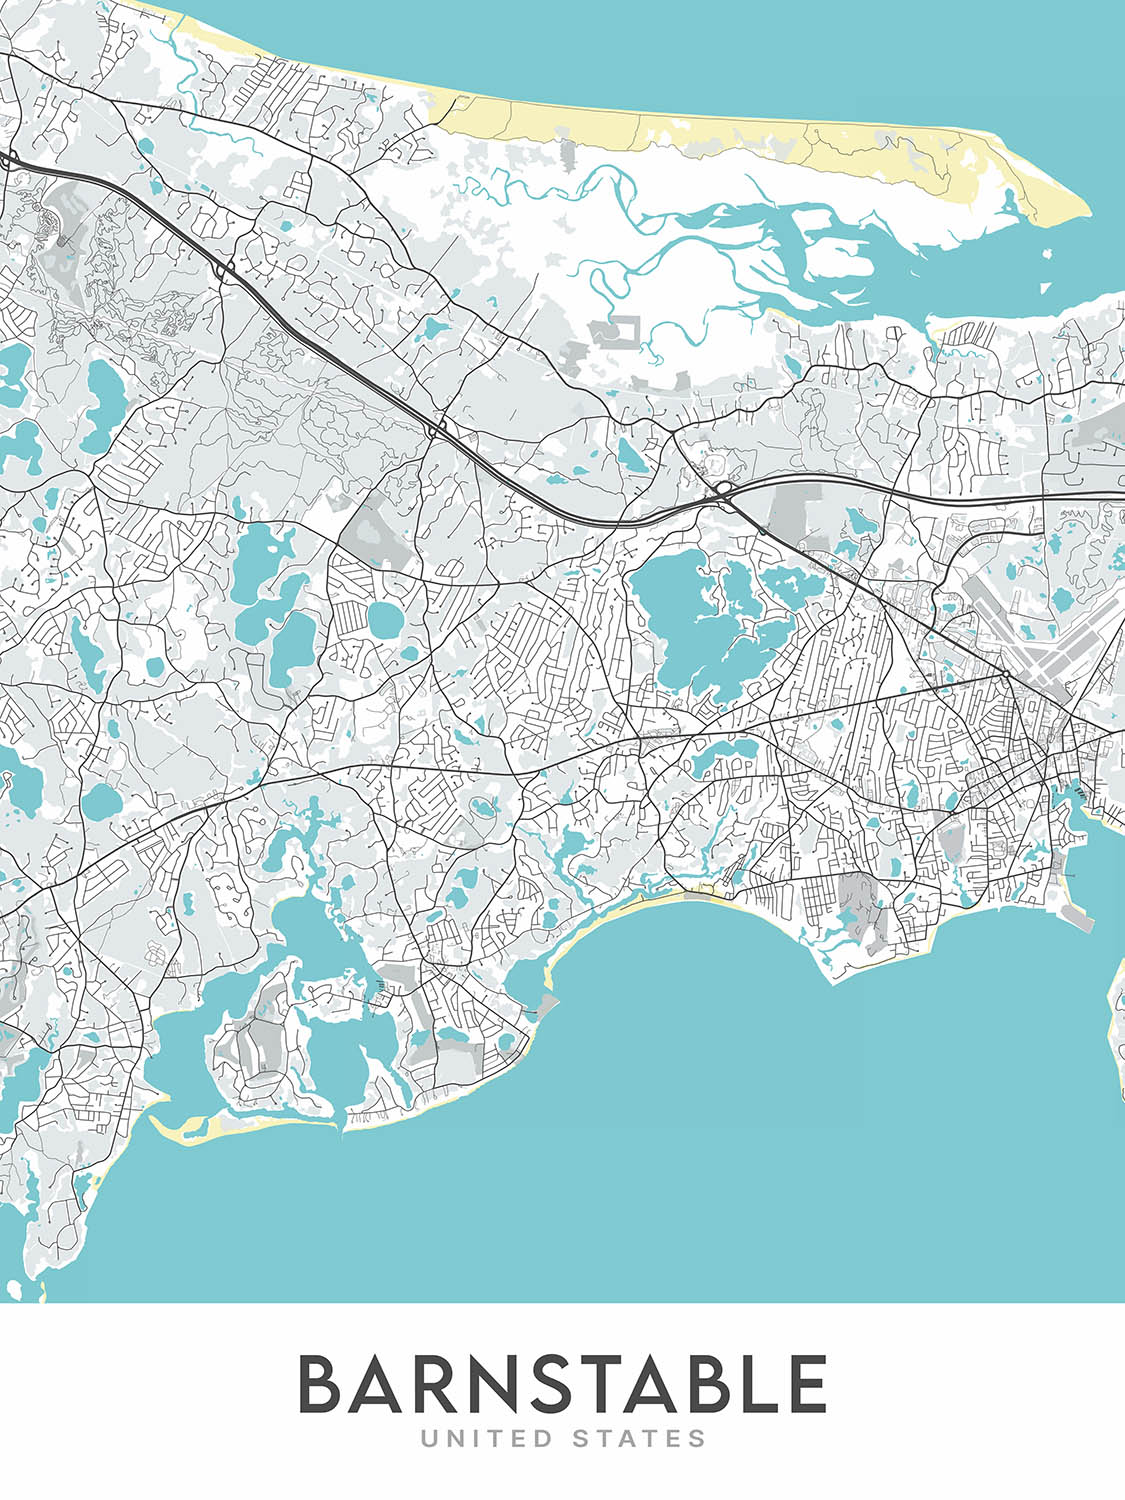 Modern City Map of Barnstable, MA: Barnstable Village, Hyannis, Sandy Neck Beach, Route 6, Route 28